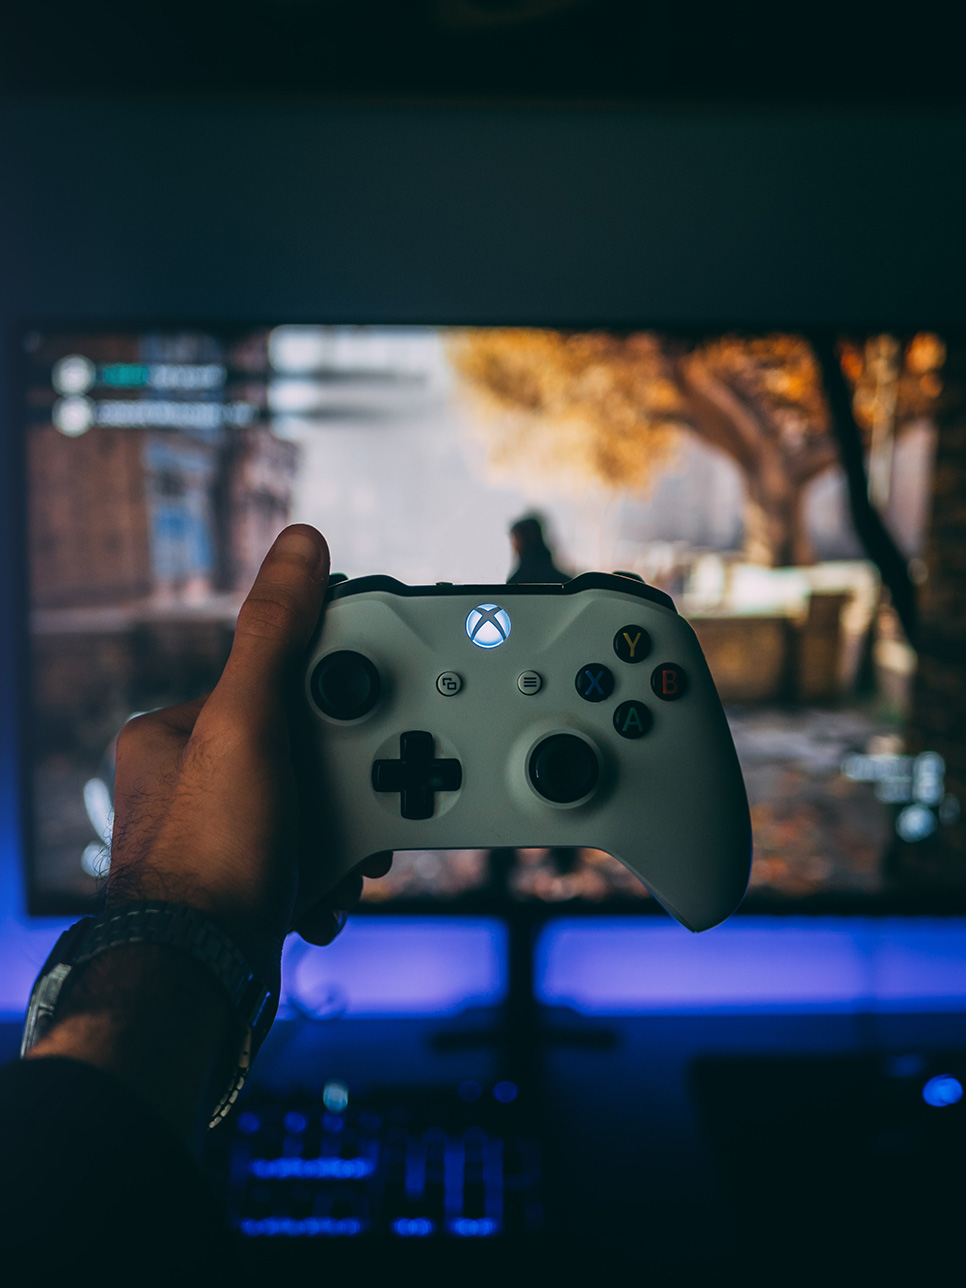 Xbox still prevails over latest PlayStation console after all. Dimitris Chapsoulas/Unsplash